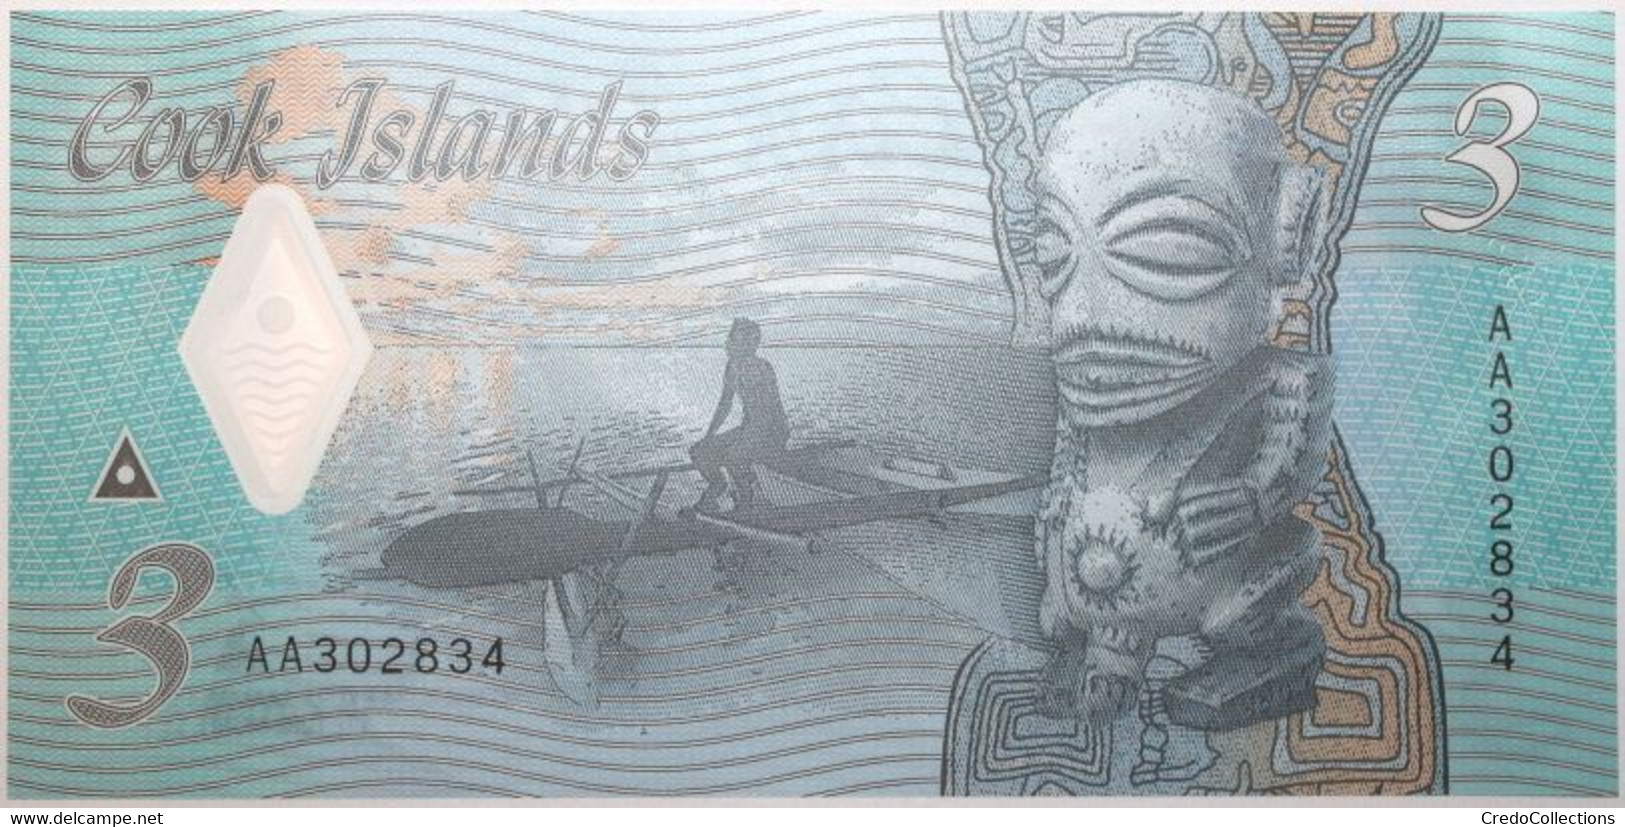 Cook - 3 Dollars - 2021 - PICK 11a - NEUF - Cook Islands